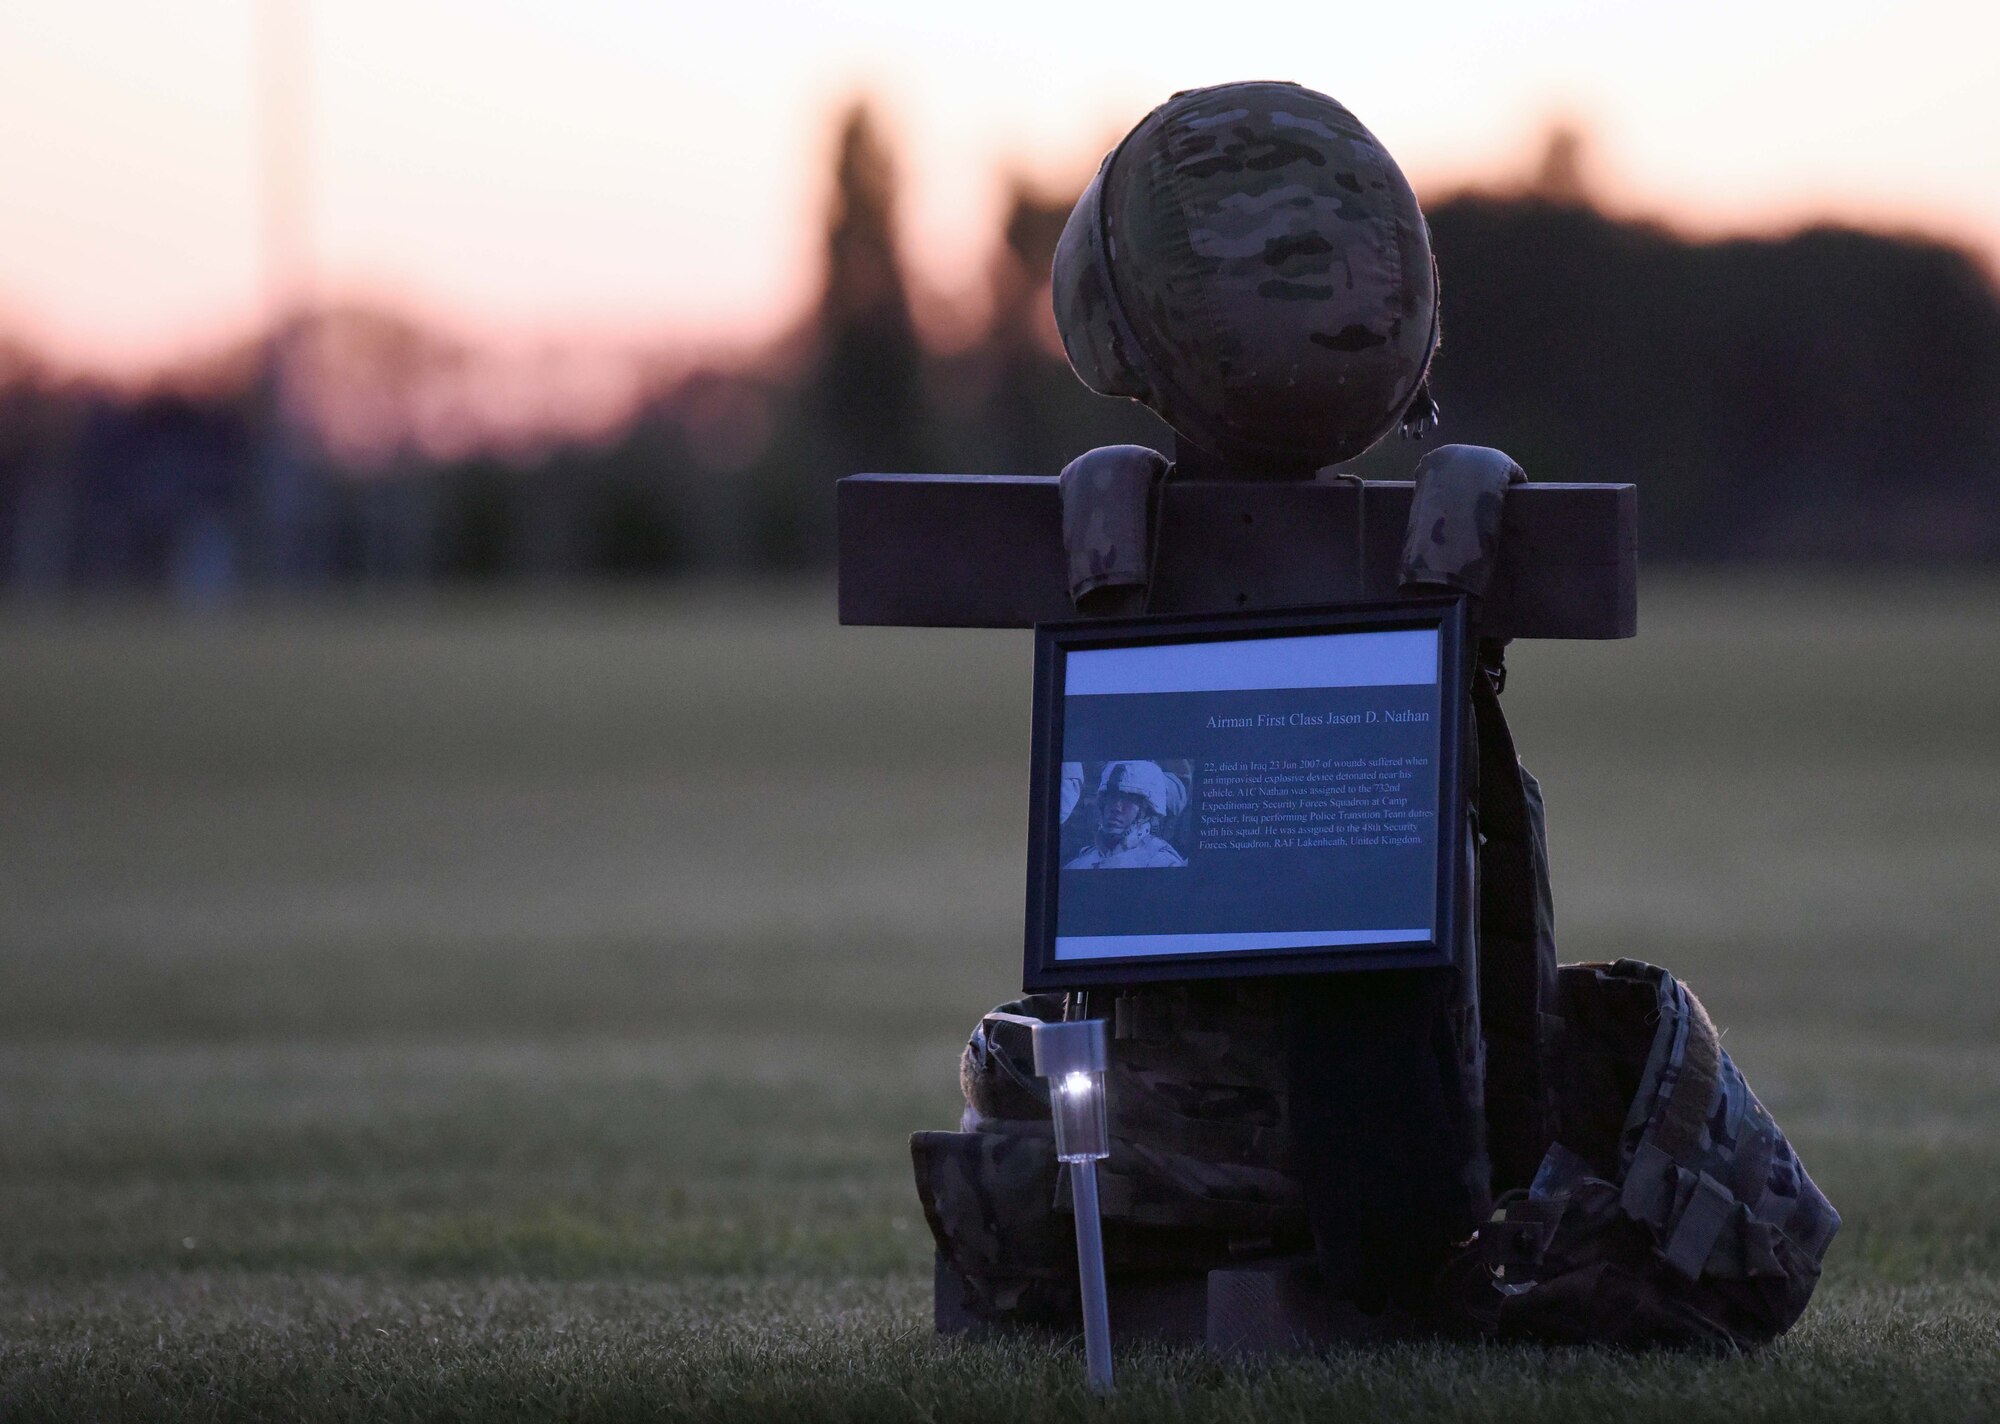 A memorial display for Airman 1st Class Jason D. Nathan rests during a candlelight vigil to honor the “Fallen 14” during events to commemorate National Police Week at RAF Mildenhall, England, May 14, 2020. Nathan, a former 48th Security Forces Squadron Airman, died in Iraq in 2007 from wounds suffered from an IED that detonated near his vehicle. (US. Air Force photo by Senior Airman Brandon Esau)